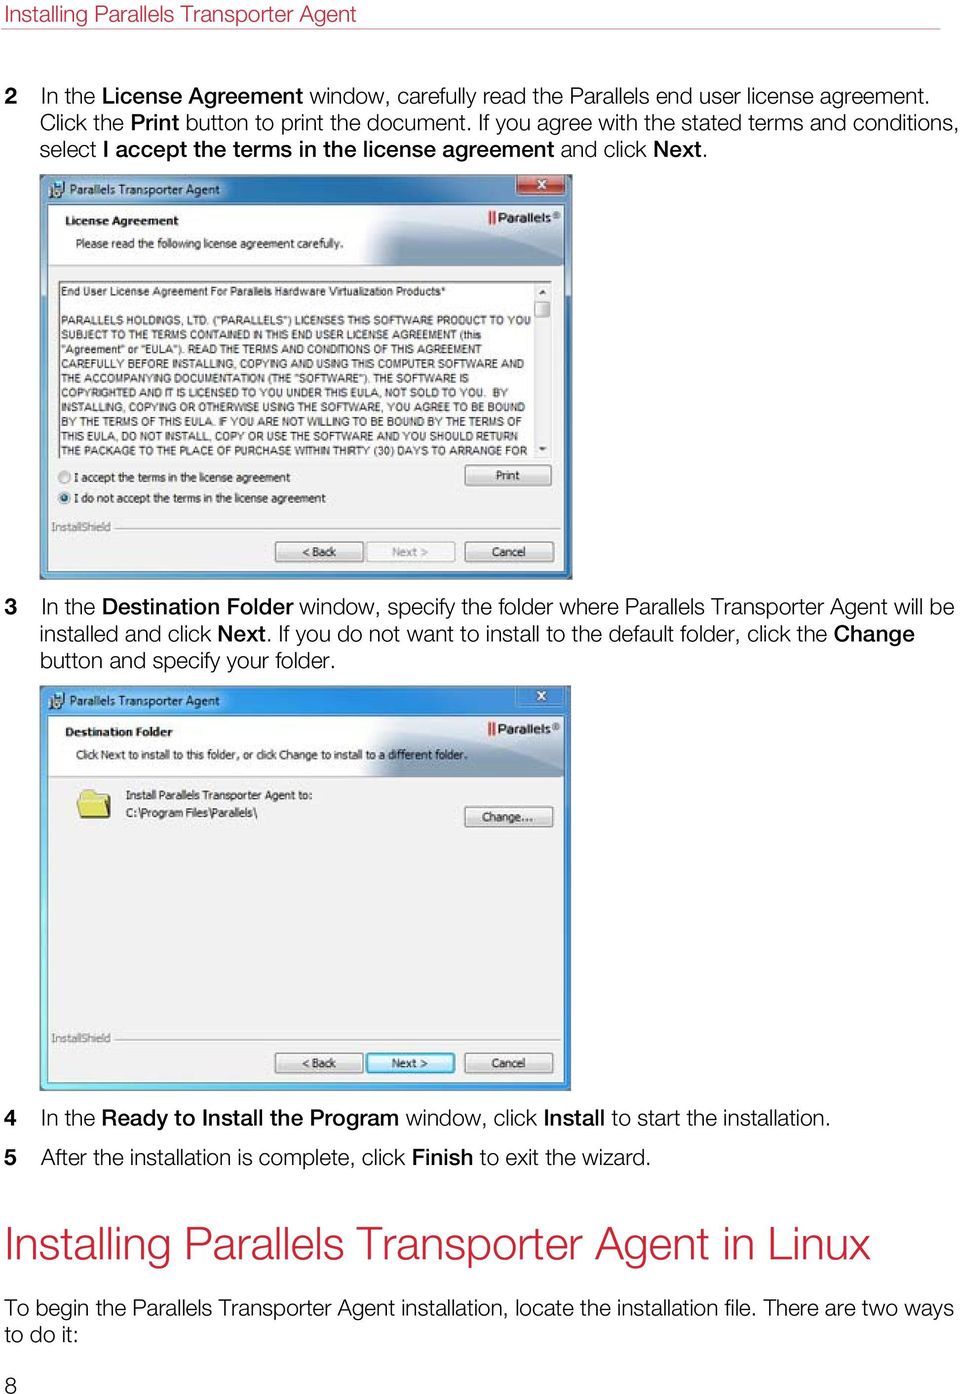 3 In the Destination Folder window, specify the folder where Parallels Transporter Agent will be installed and click Next.